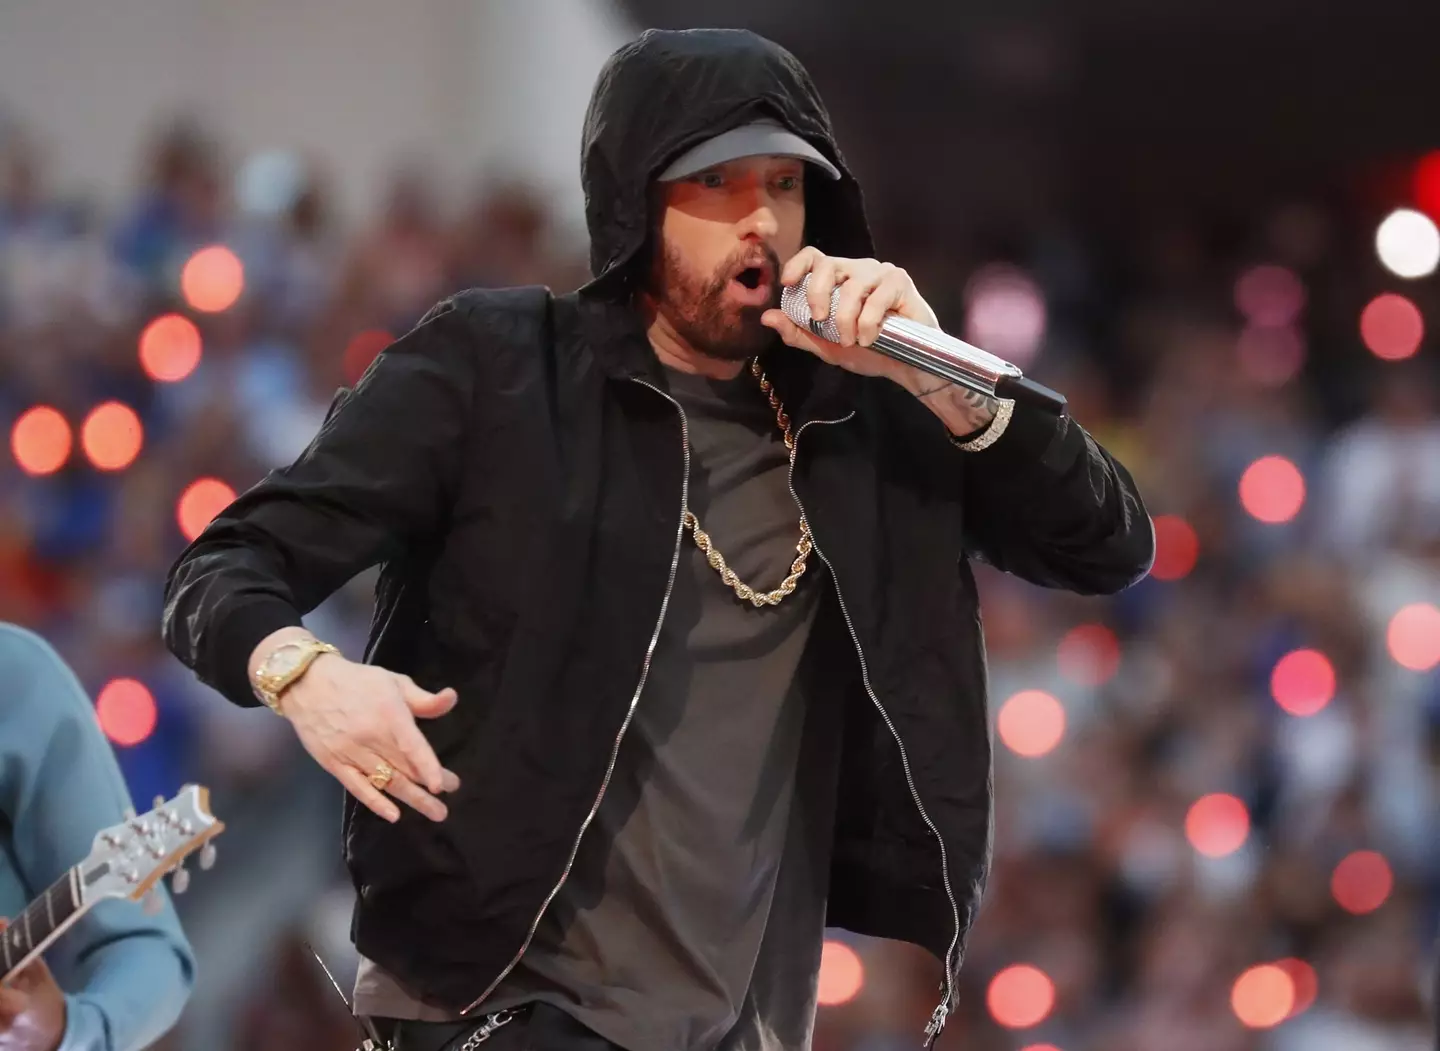 Eminem performed with 50 Cent at the Super Bowl.